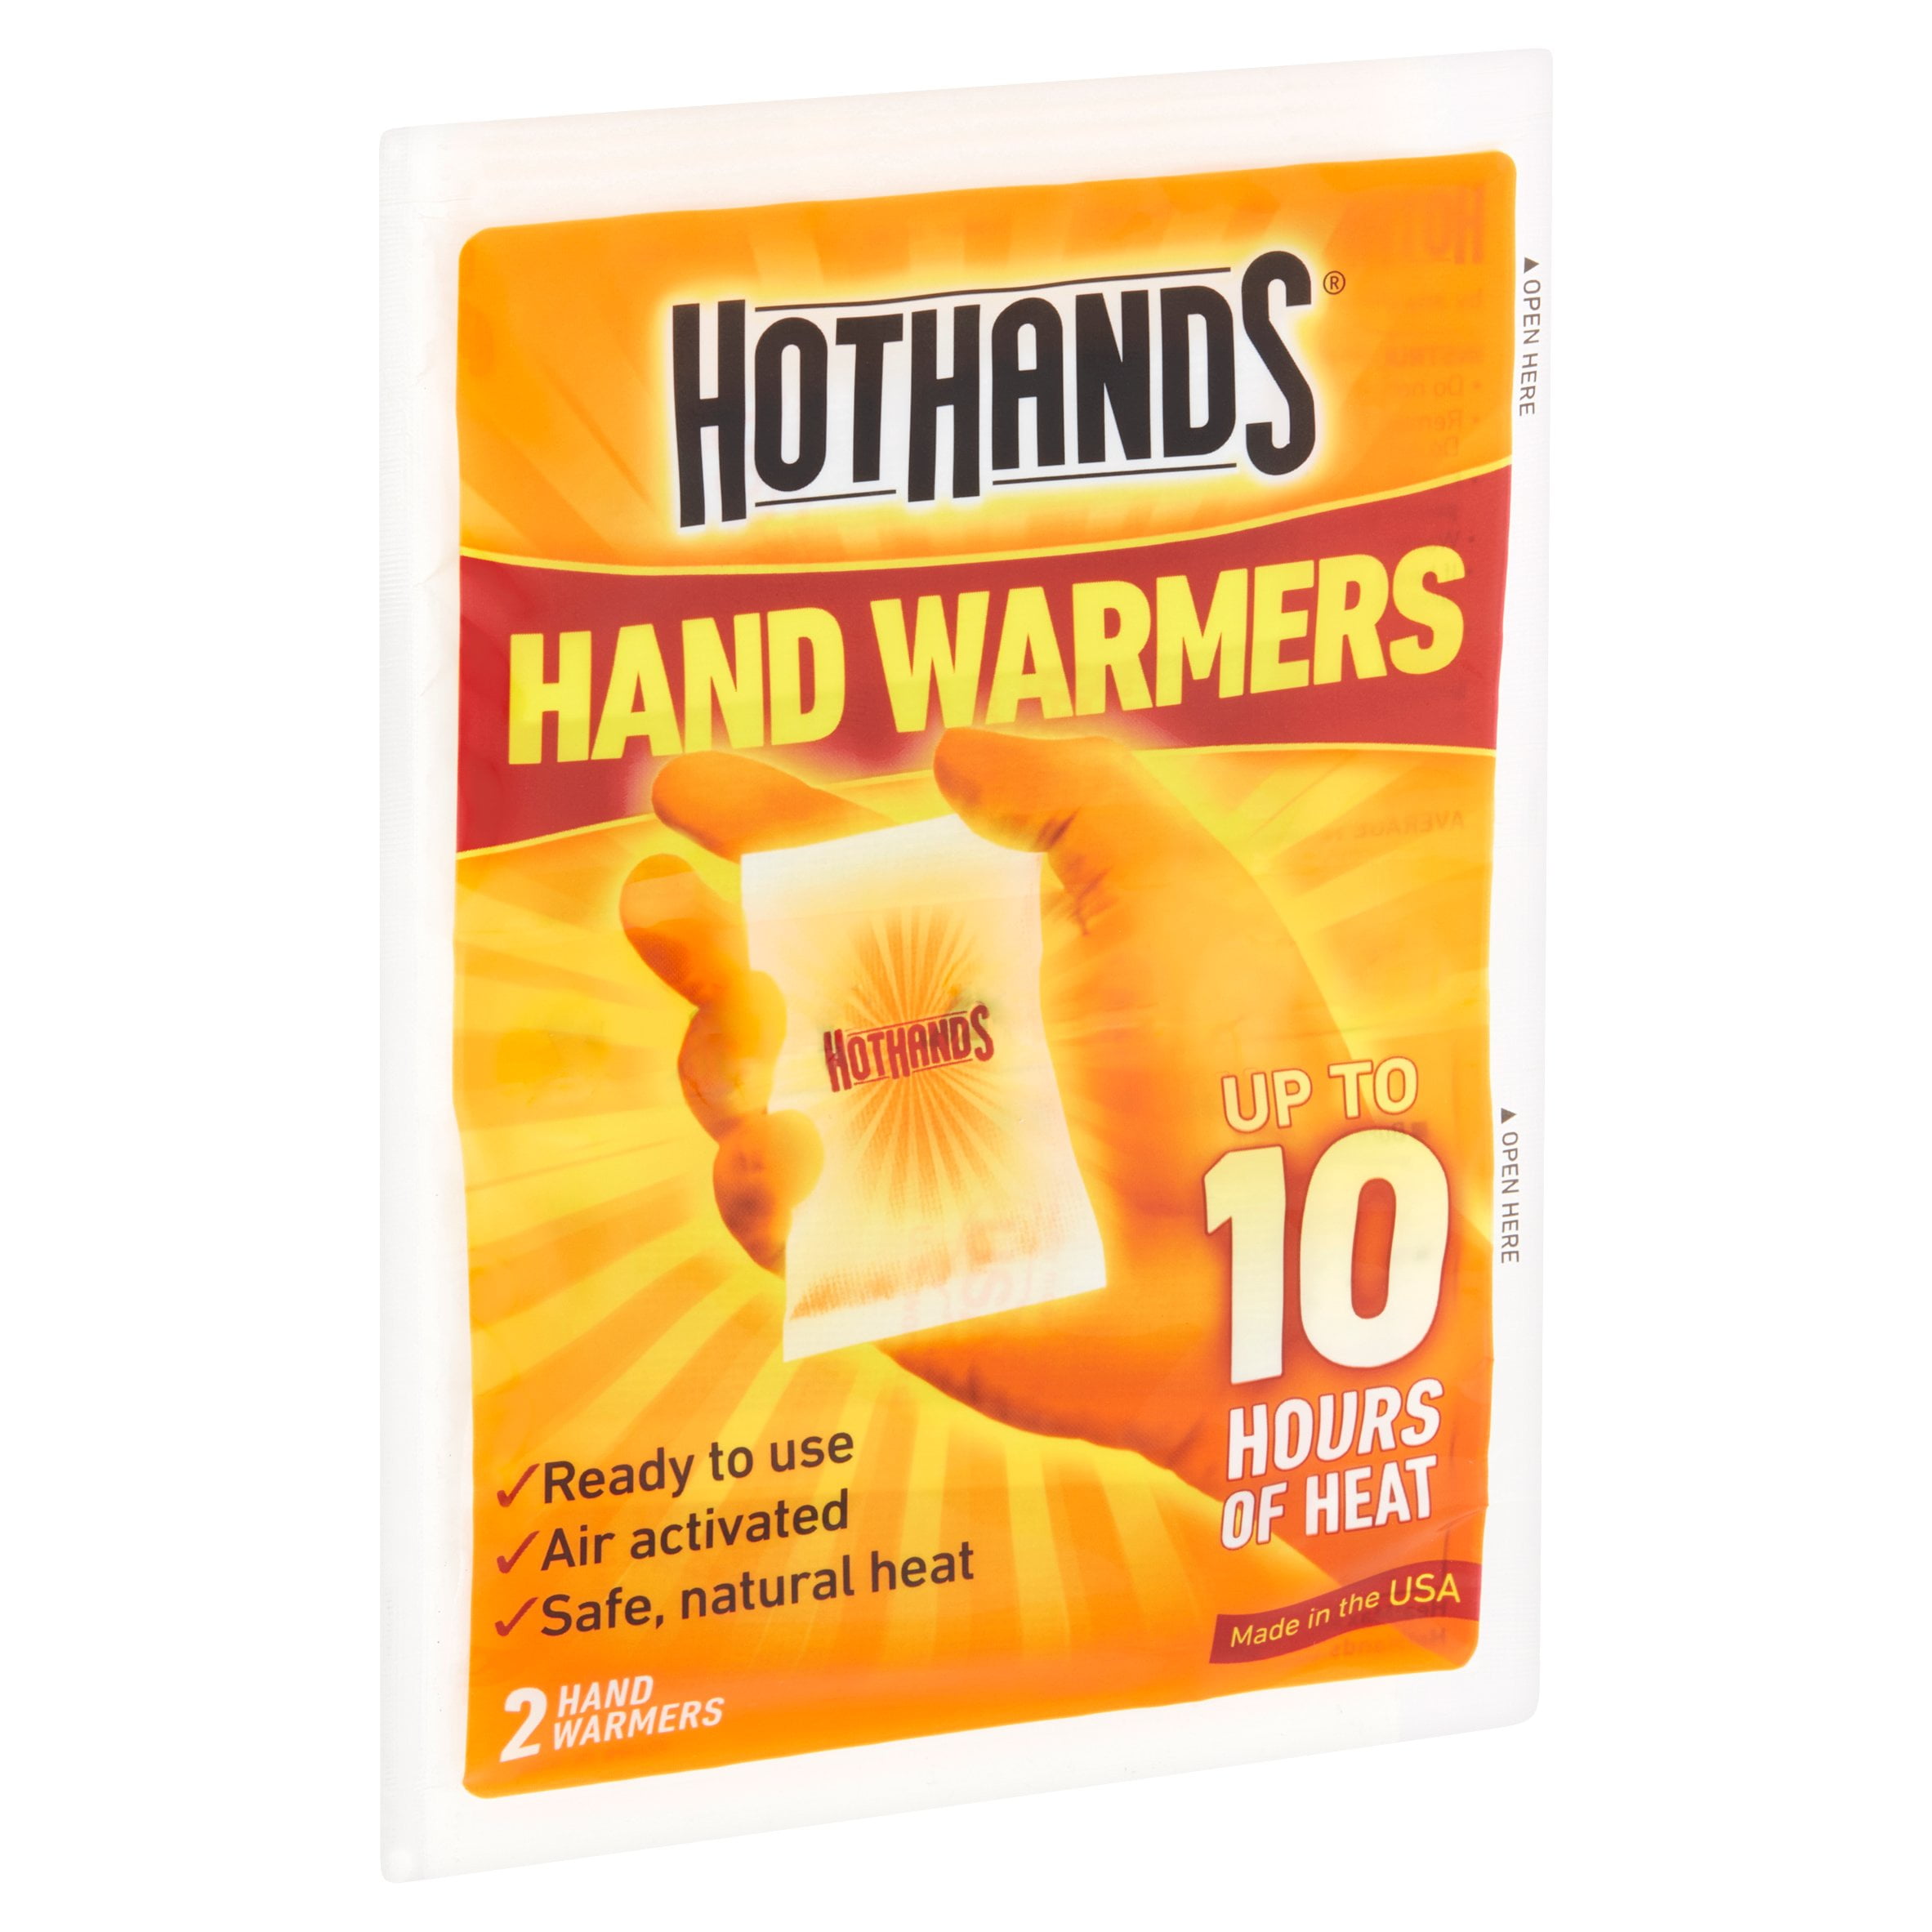 40 Remington Hand Warmers Lot of 4 packs of 10 Warmers Lasts 7 hrs. 